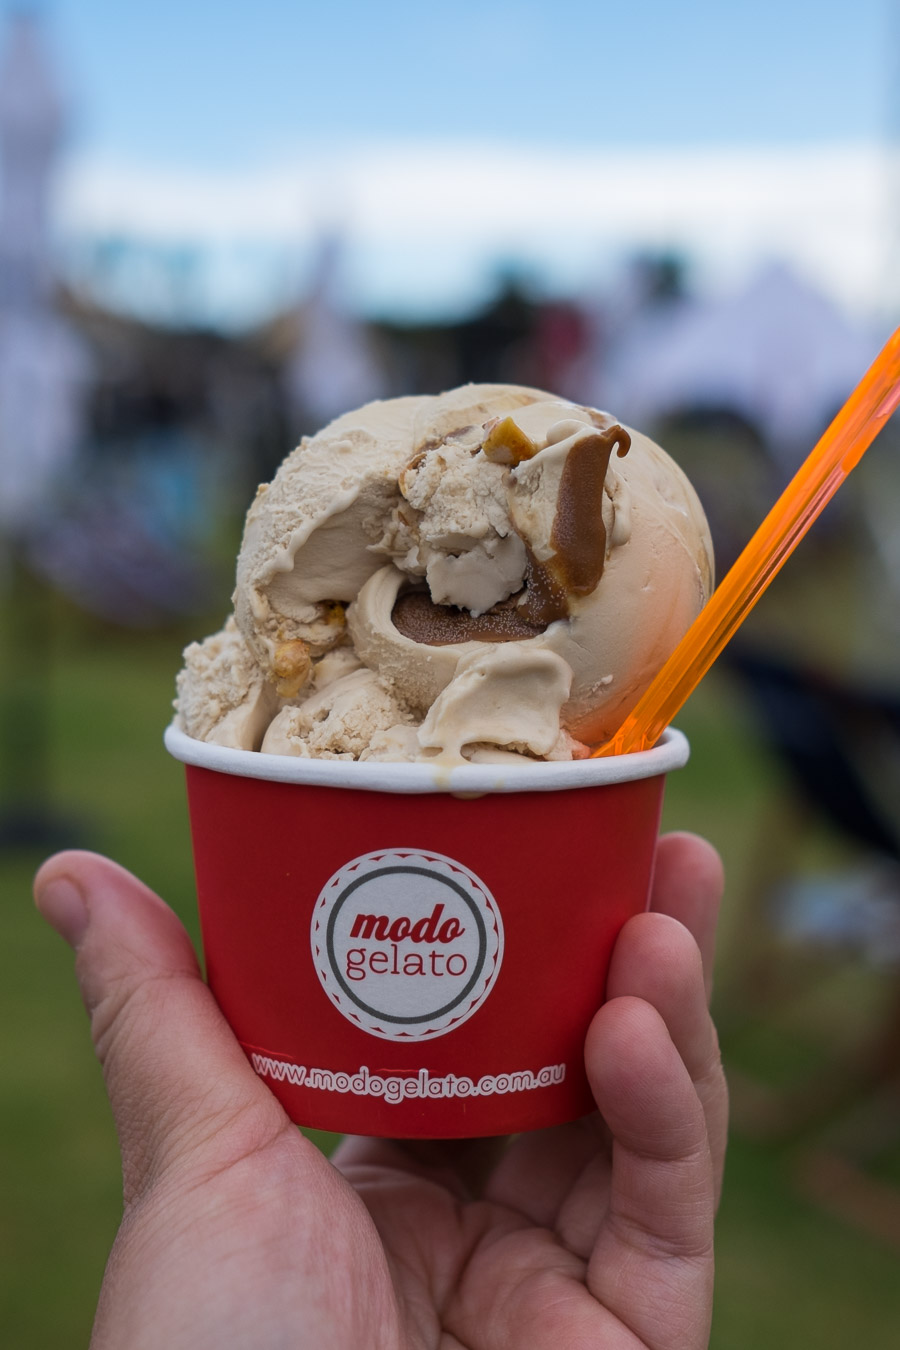 Modo Gelato: Salted Caramel with Honeycomb (6 crowns for 2 scoops).